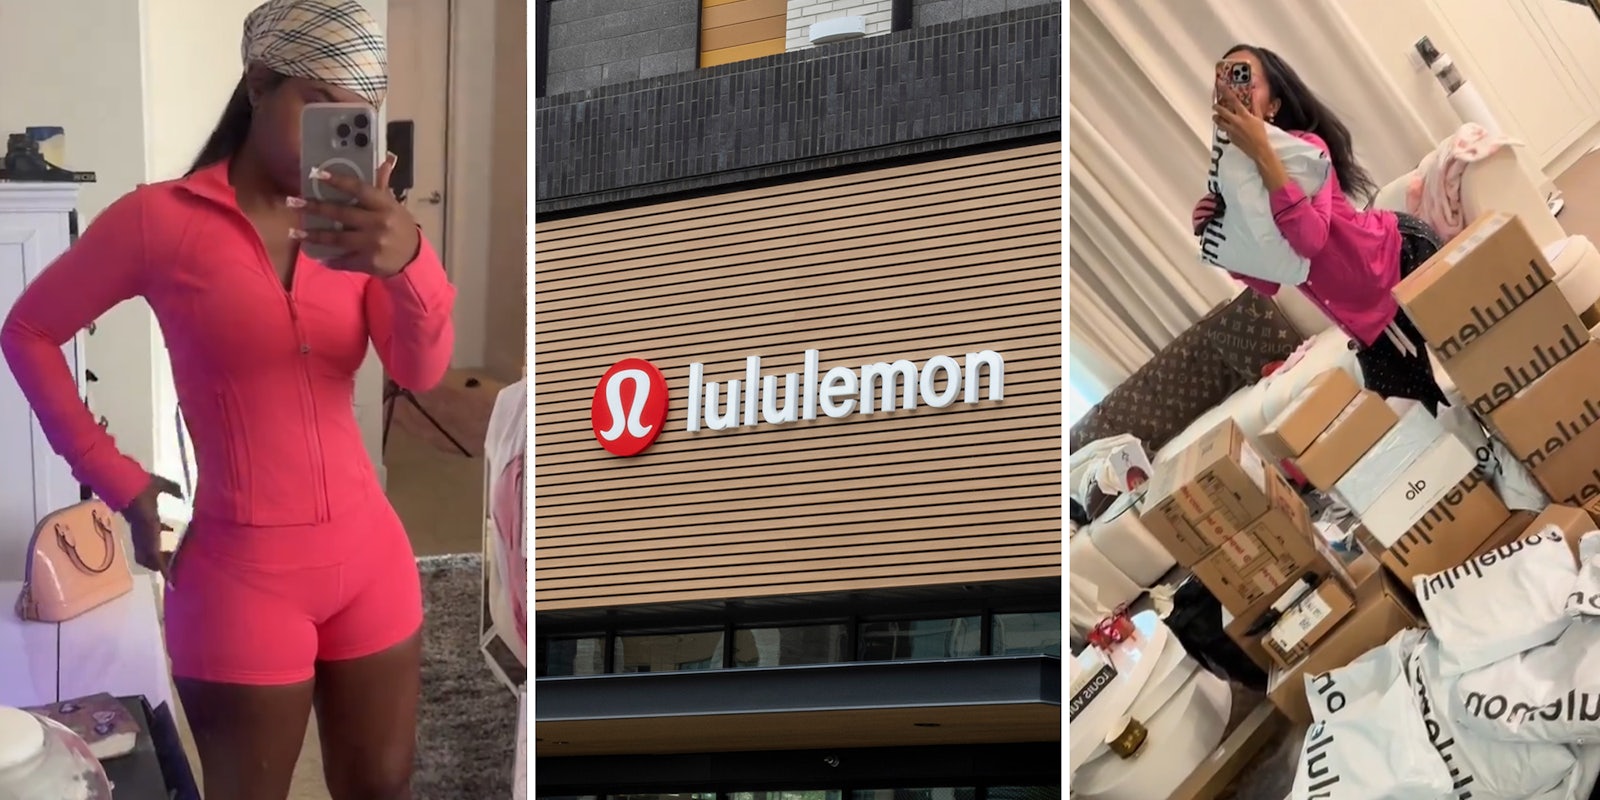 influencer wearing pink lululemon outfit;lululemon logo store front; influencer surrounded by lululemon packaging and boxes